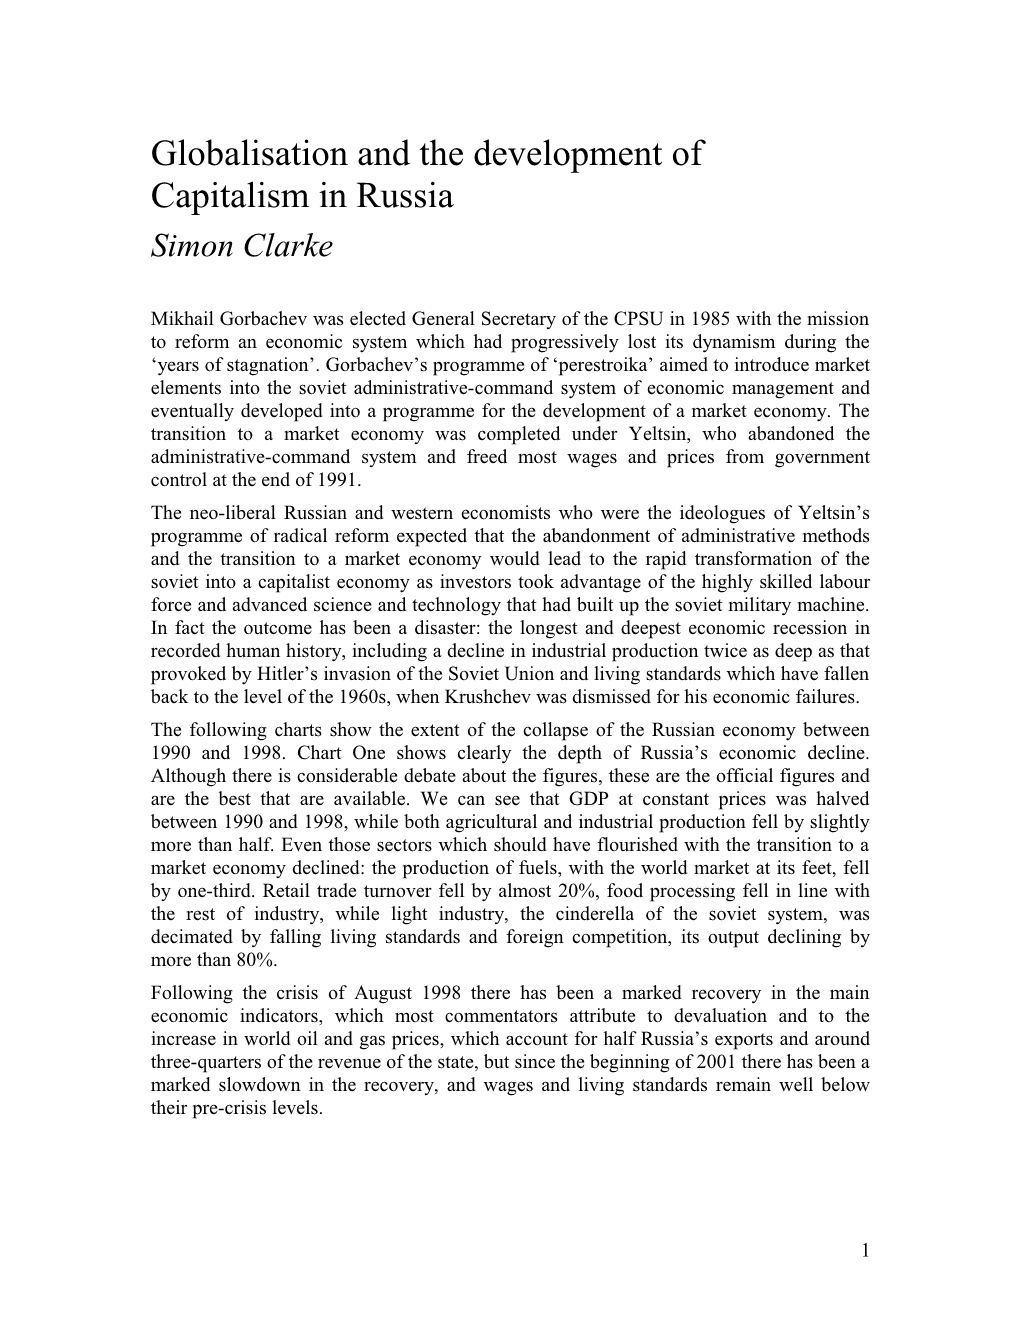 Globalisation and the Development of Capitalism in Russia